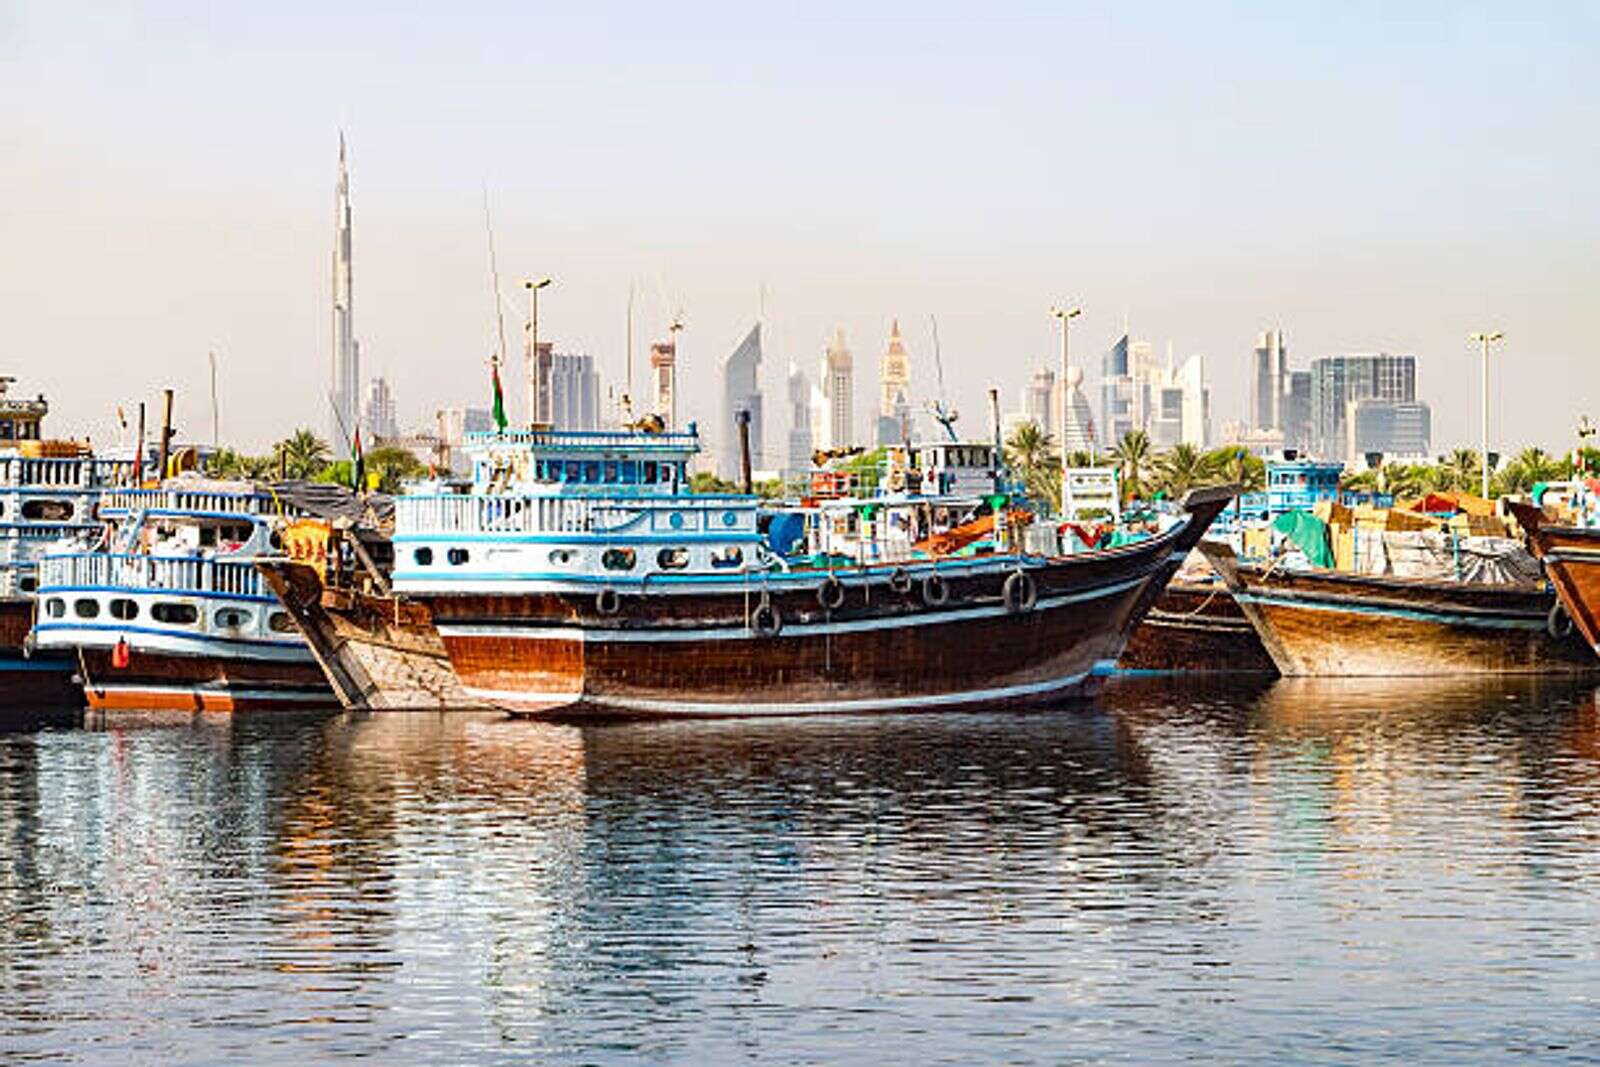 dubai: entry, departure of wooden dhows temporarily suspended due to unstable weather